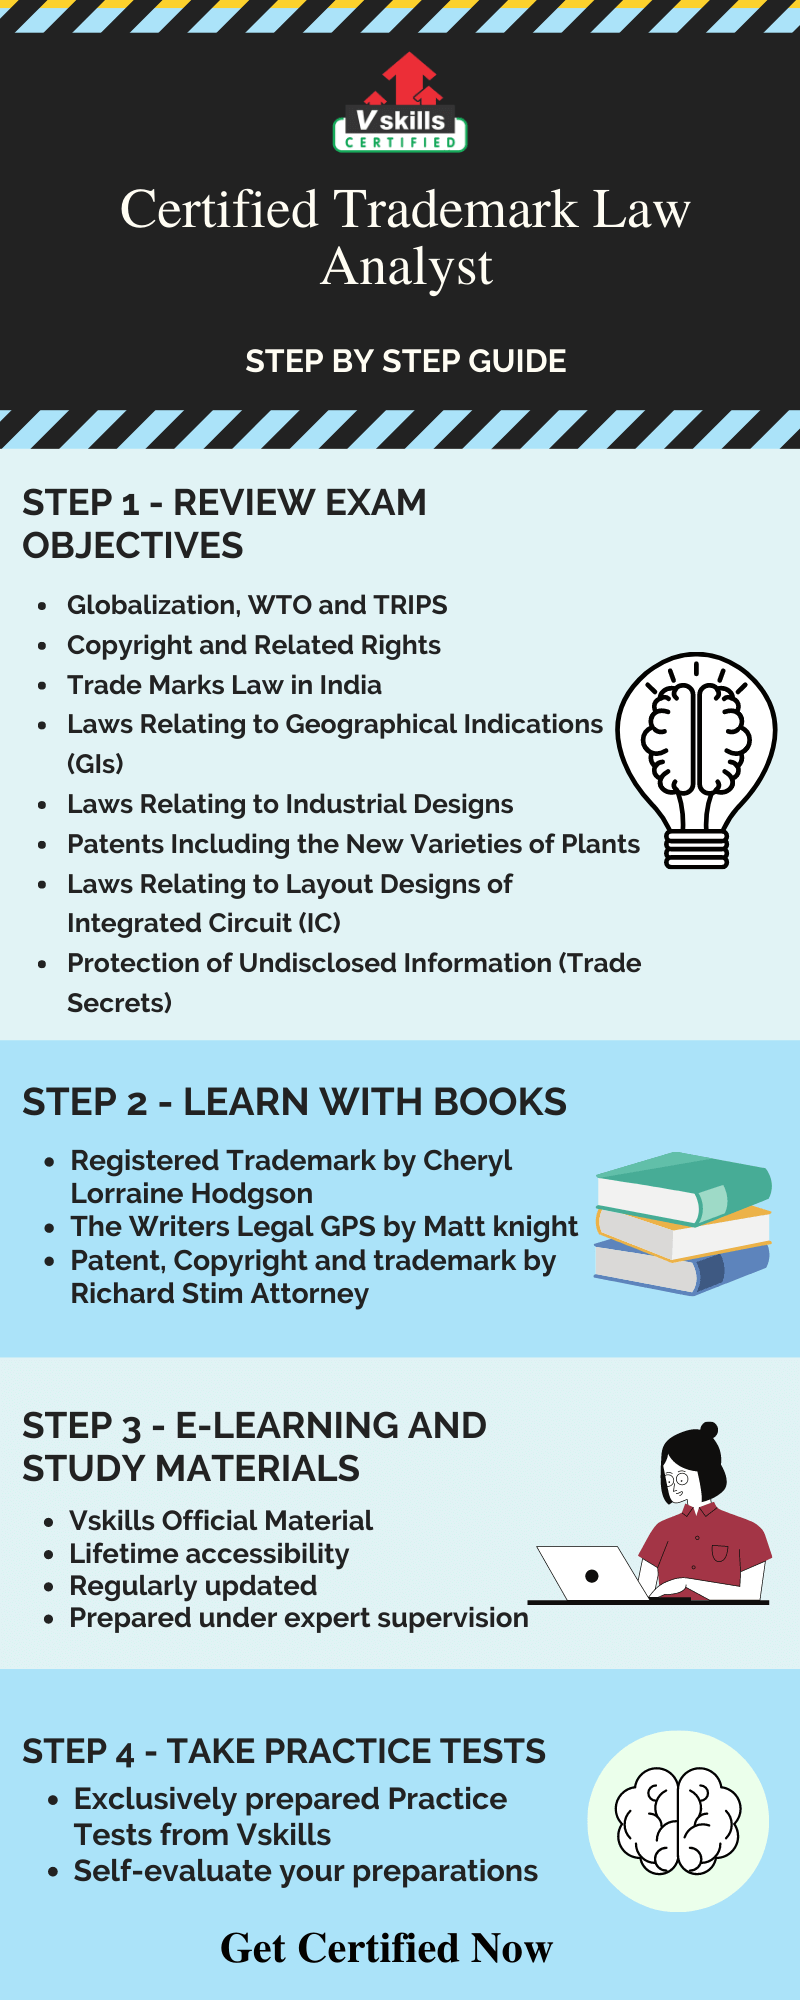 Certified Trademark Law Analyst Preparation Guide